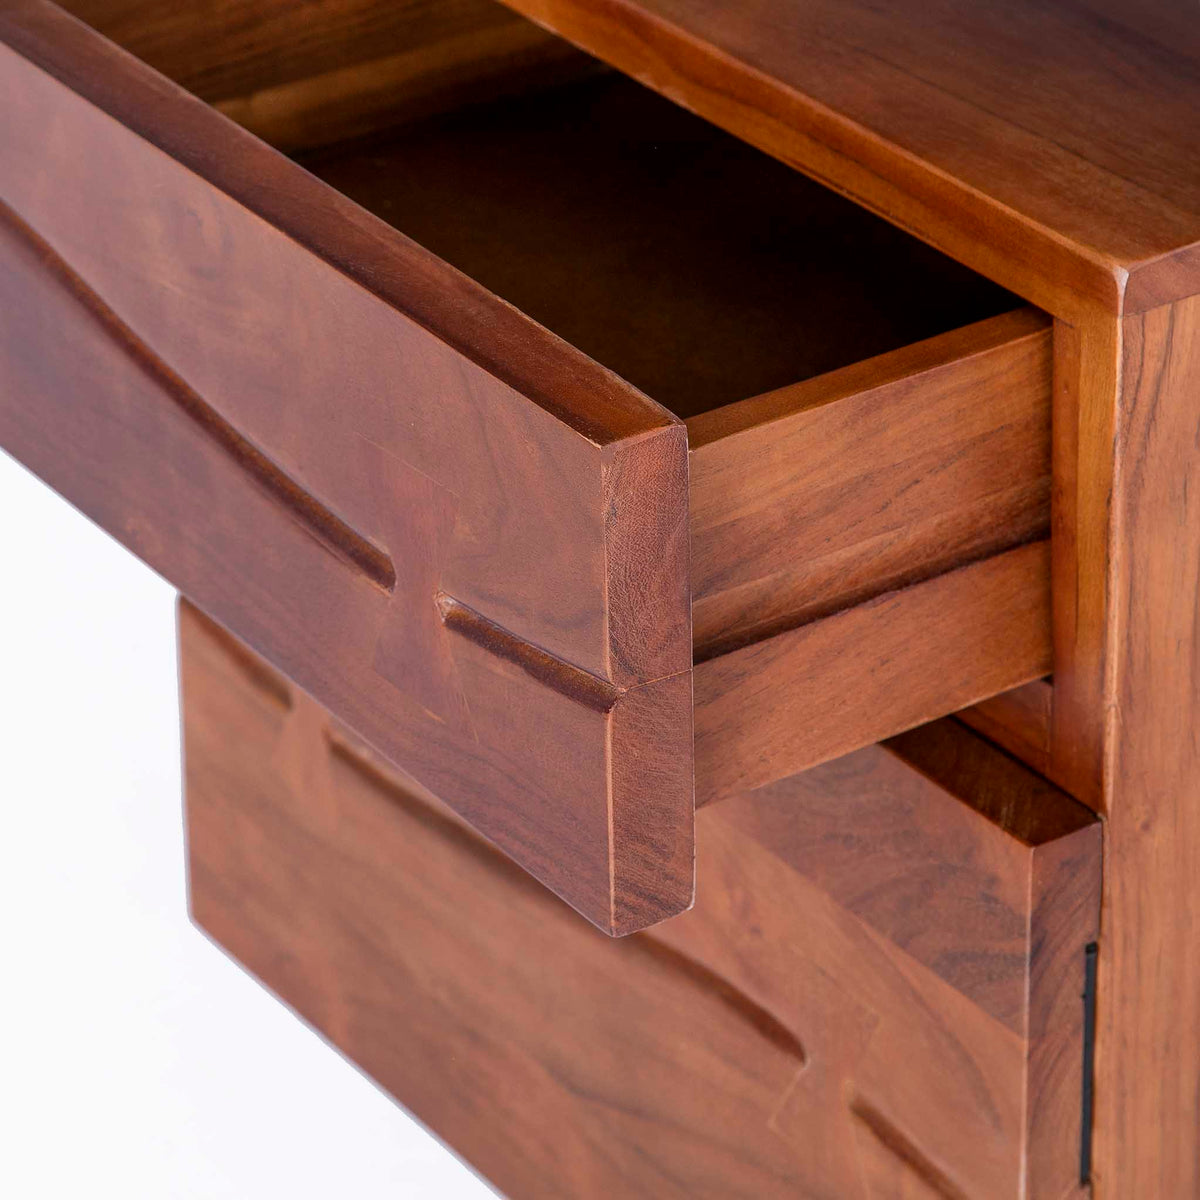 Naboo Writing Desk close up of wooden drawer runners